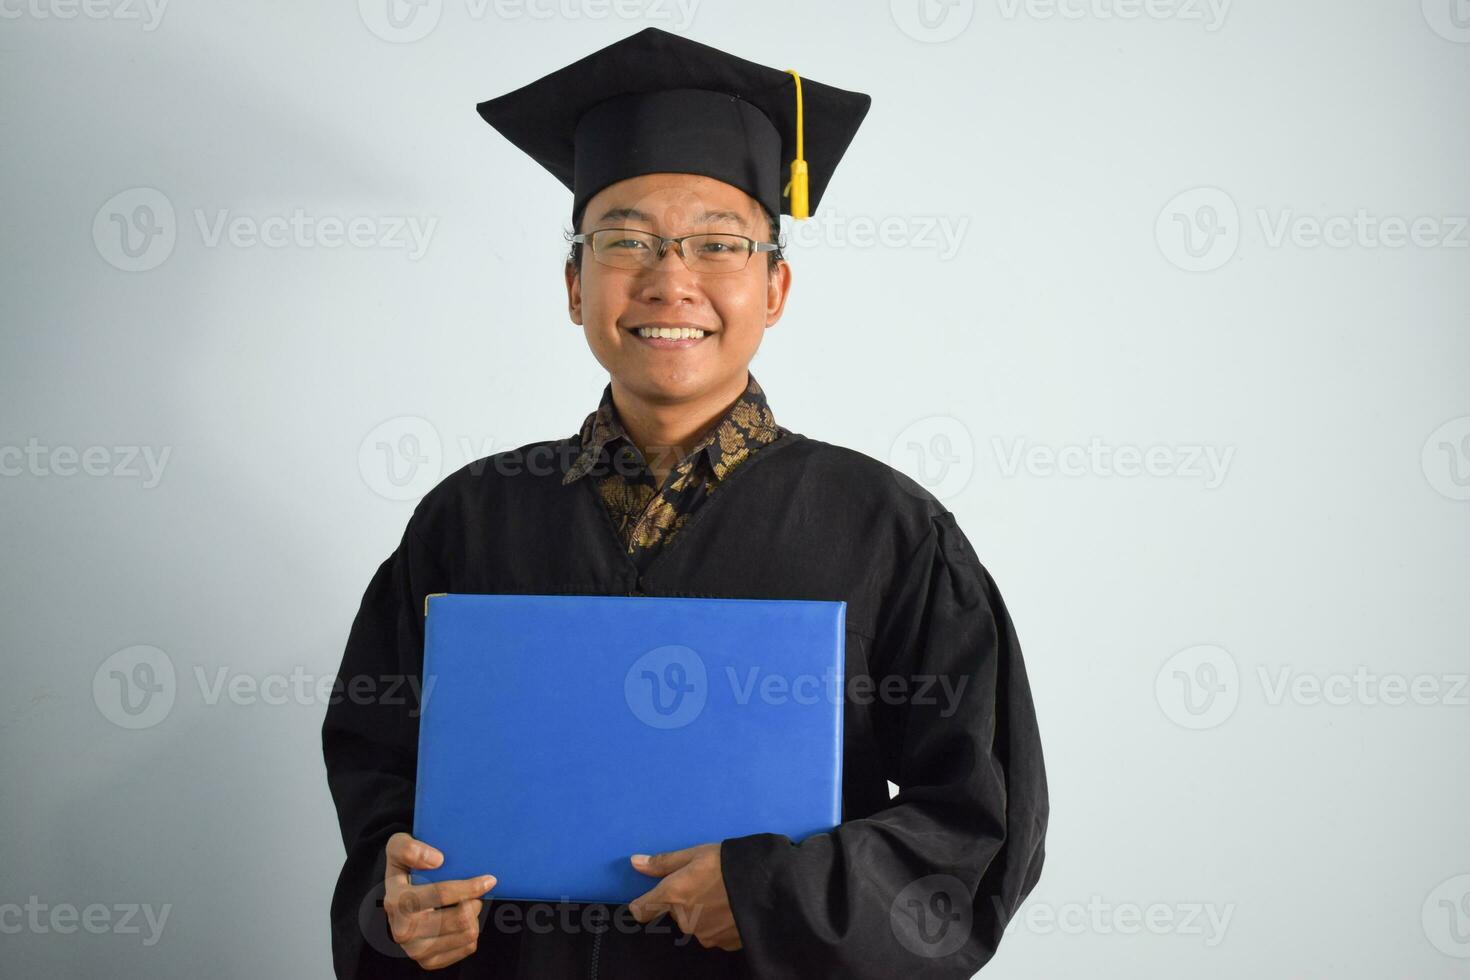 Expressive of Adult indonesia male wear graduation robe, hat and eyeglasses, Asian Male graduation bring blank blue certificate isolated on white background, expressions of portrait graduation photo